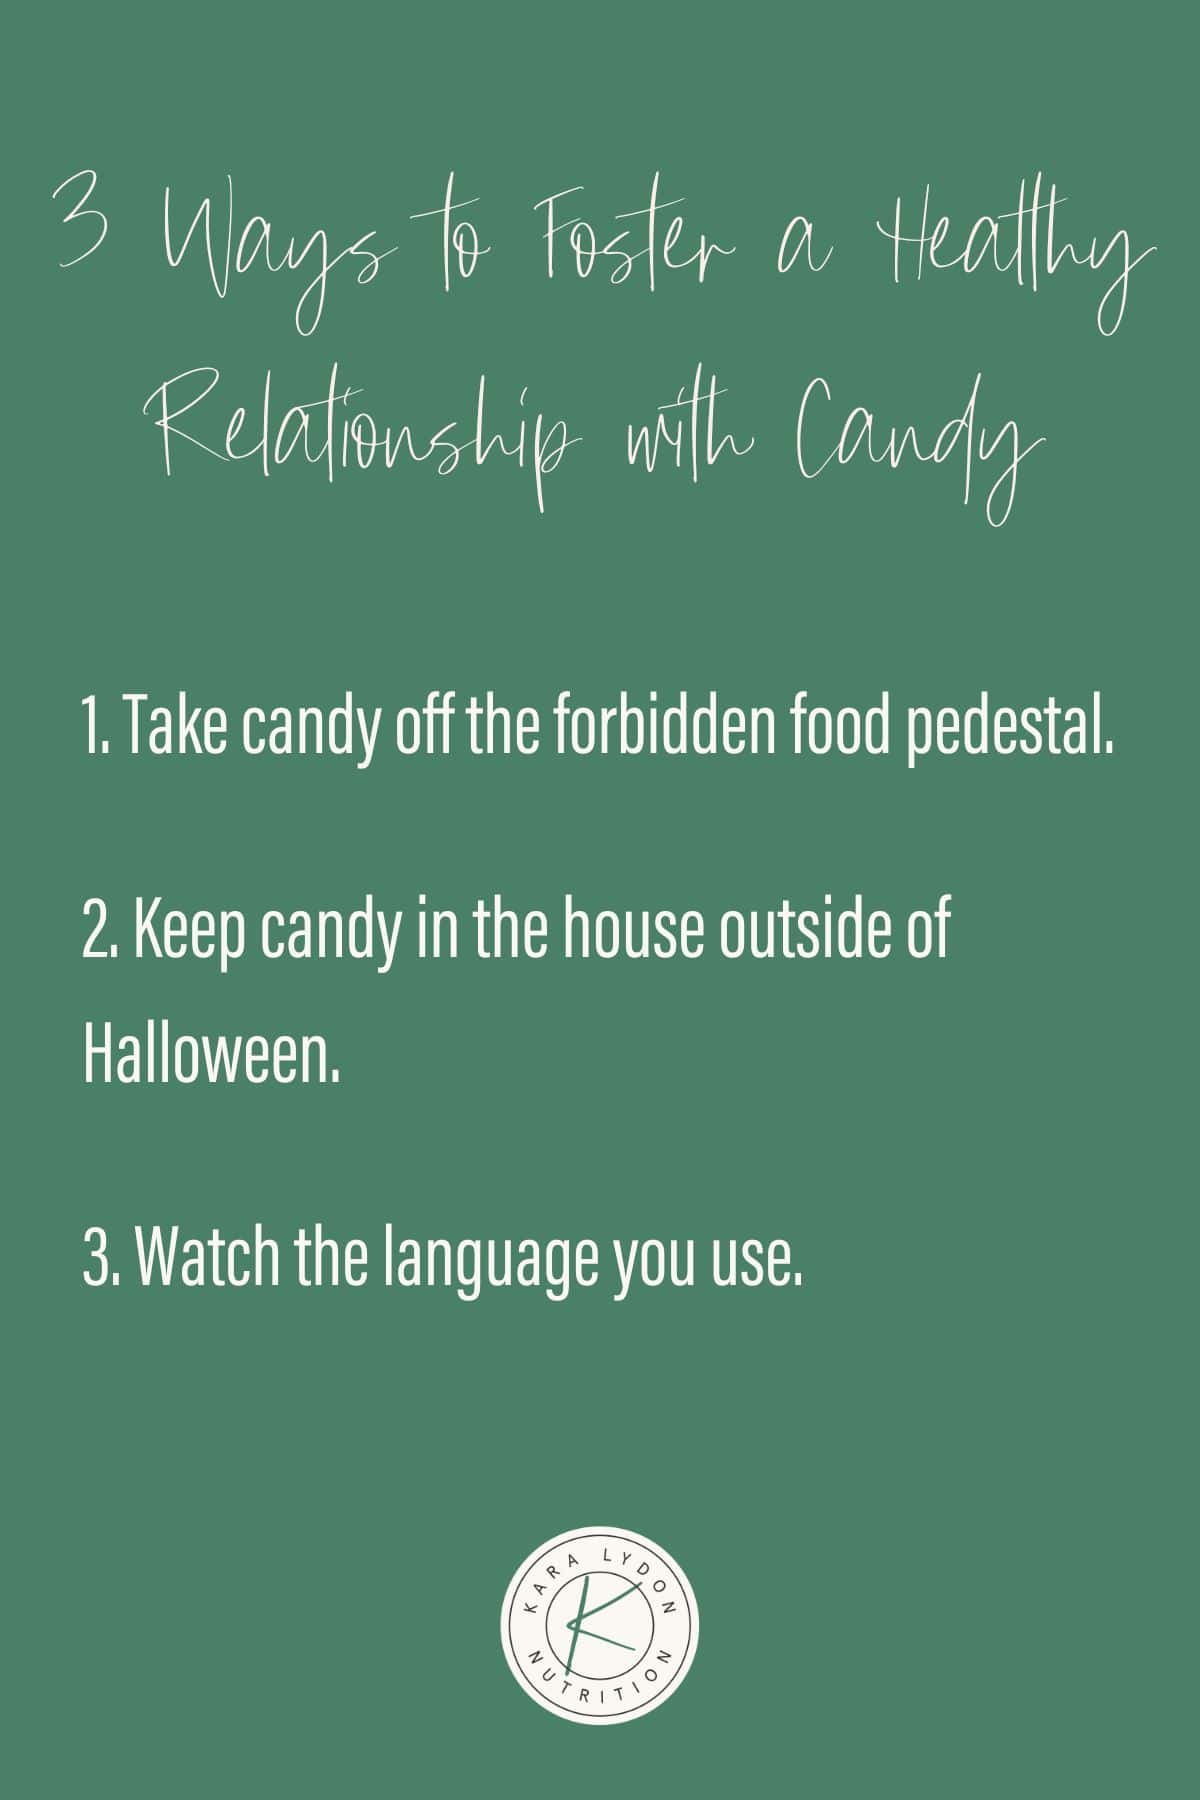 Graphic listing 3 ways to foster a healthy relationship with candy